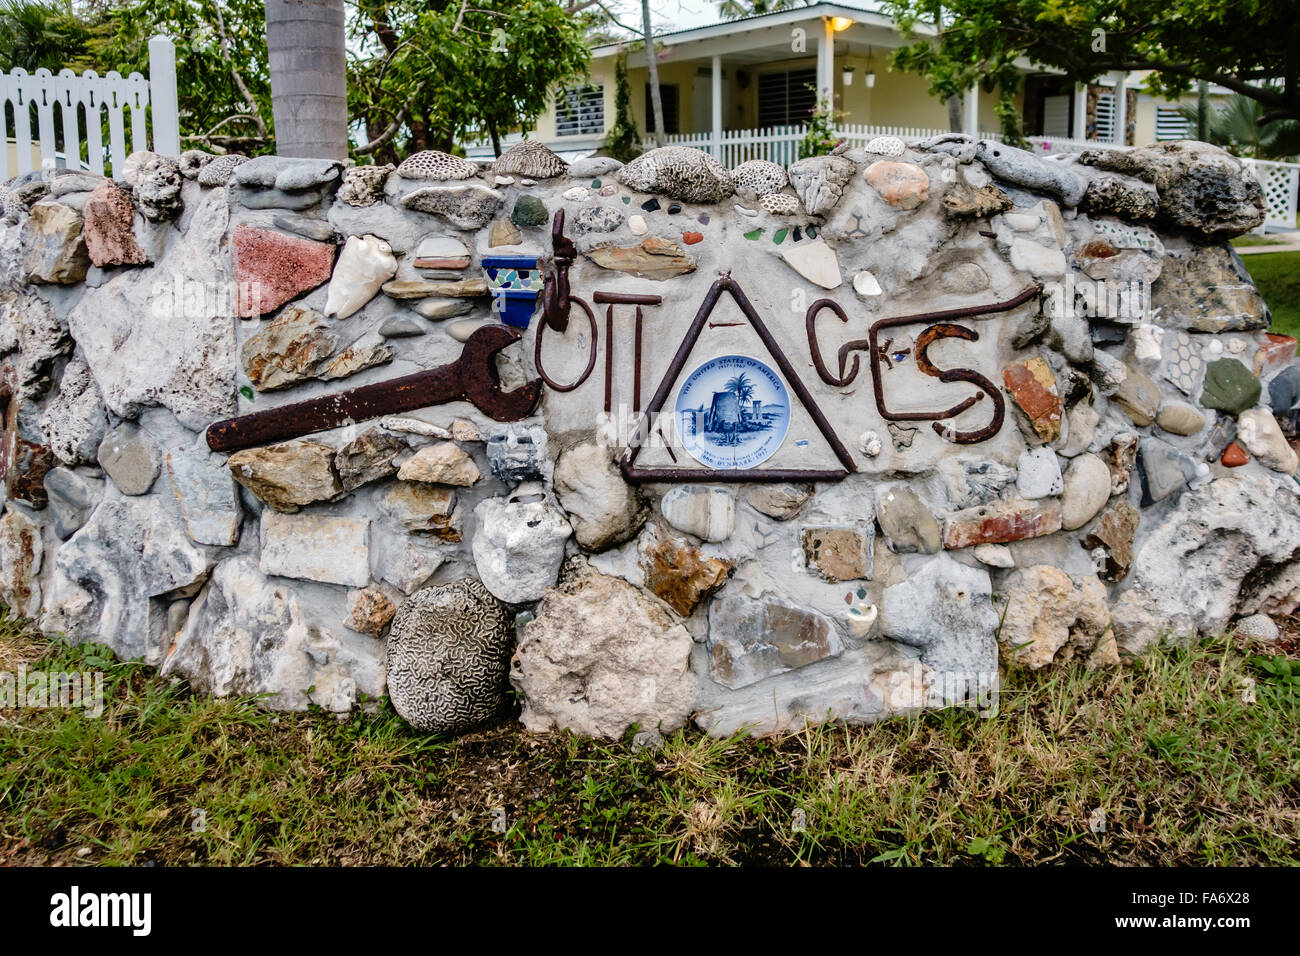 A Wall consisting of stones and sea life items advertising Cottages By the Sea, a resort in St. Croix, U.S. Virgin Islands. Stock Photo